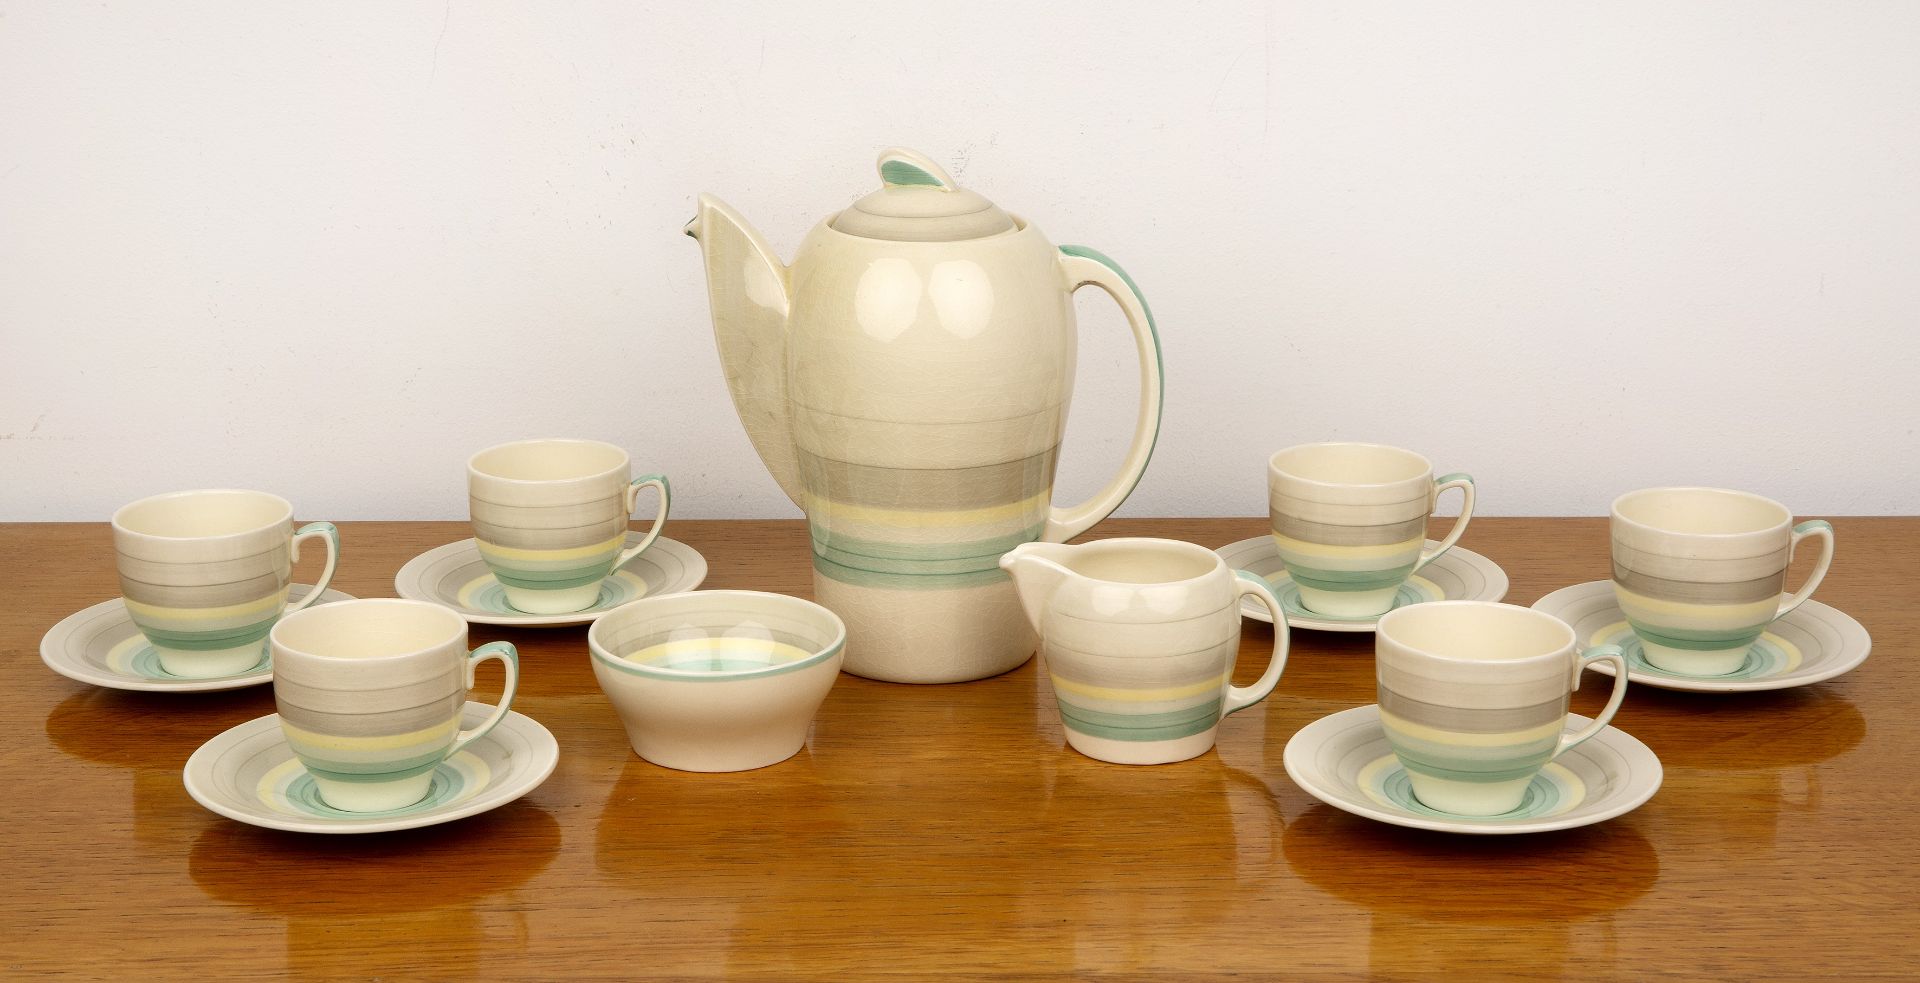 Susie Cooper (1902-1995) ‘Kestrel’ design coffee set, with green banded decoration, comprising